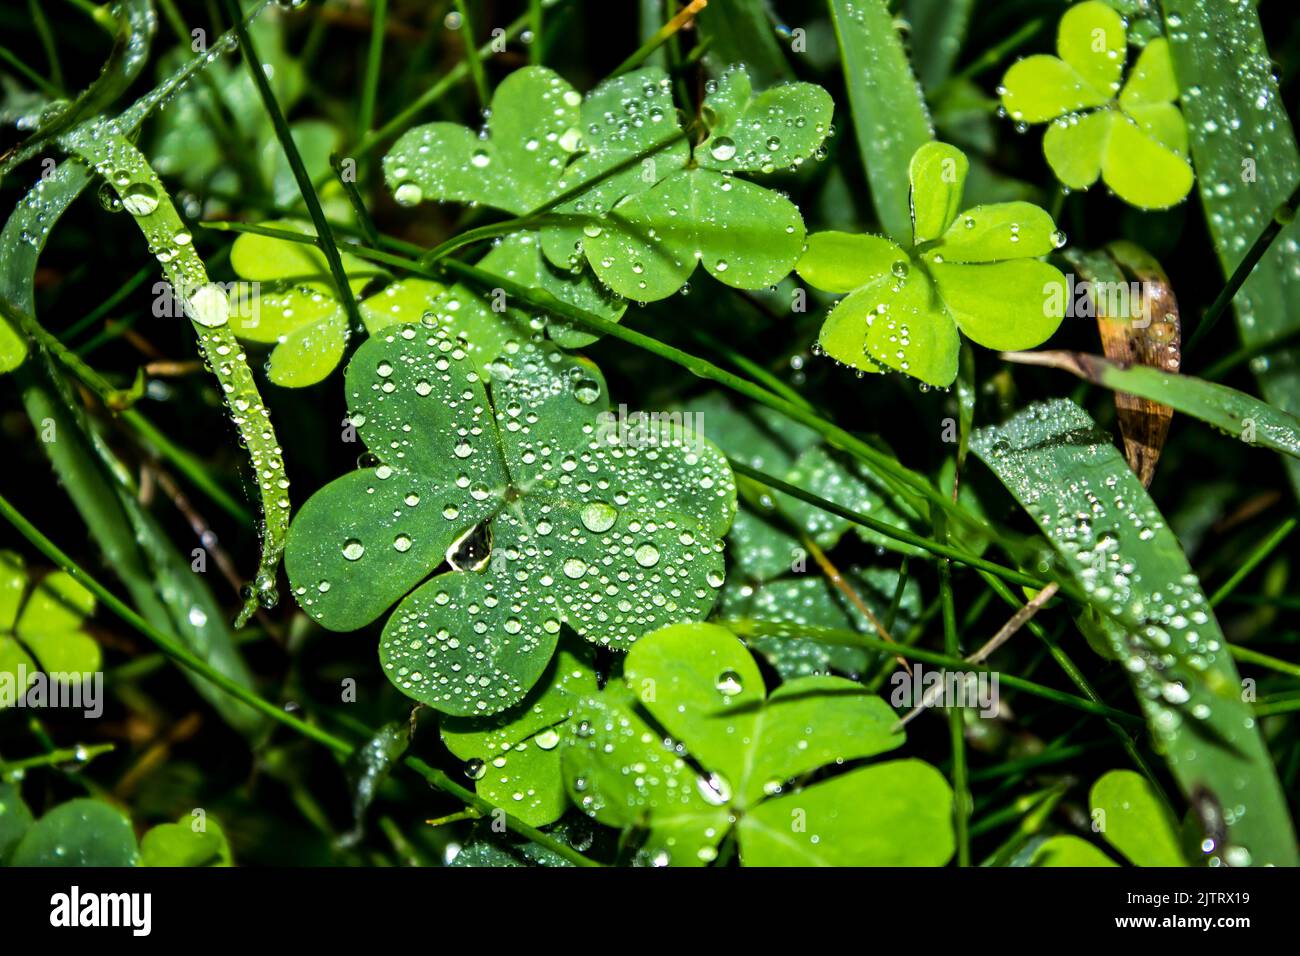 The heart shaped leafs of woodsorrel, covered in droplets in the undergrowth of the Tsitsikamma Forest, South Africa. Stock Photo